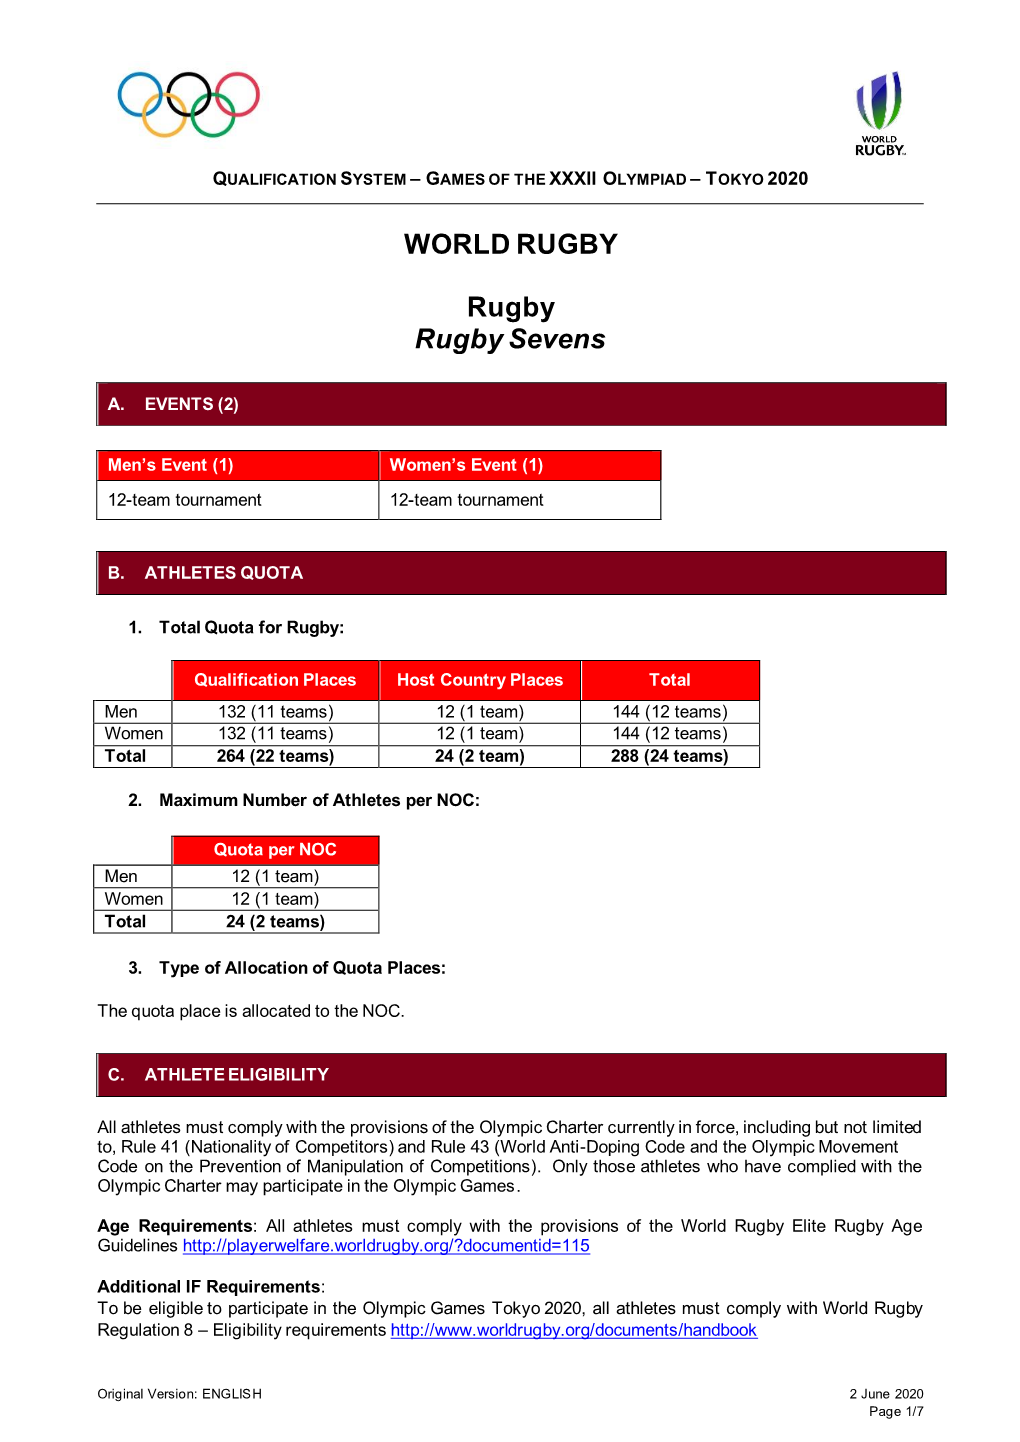 WORLD RUGBY Rugby Rugby Sevens